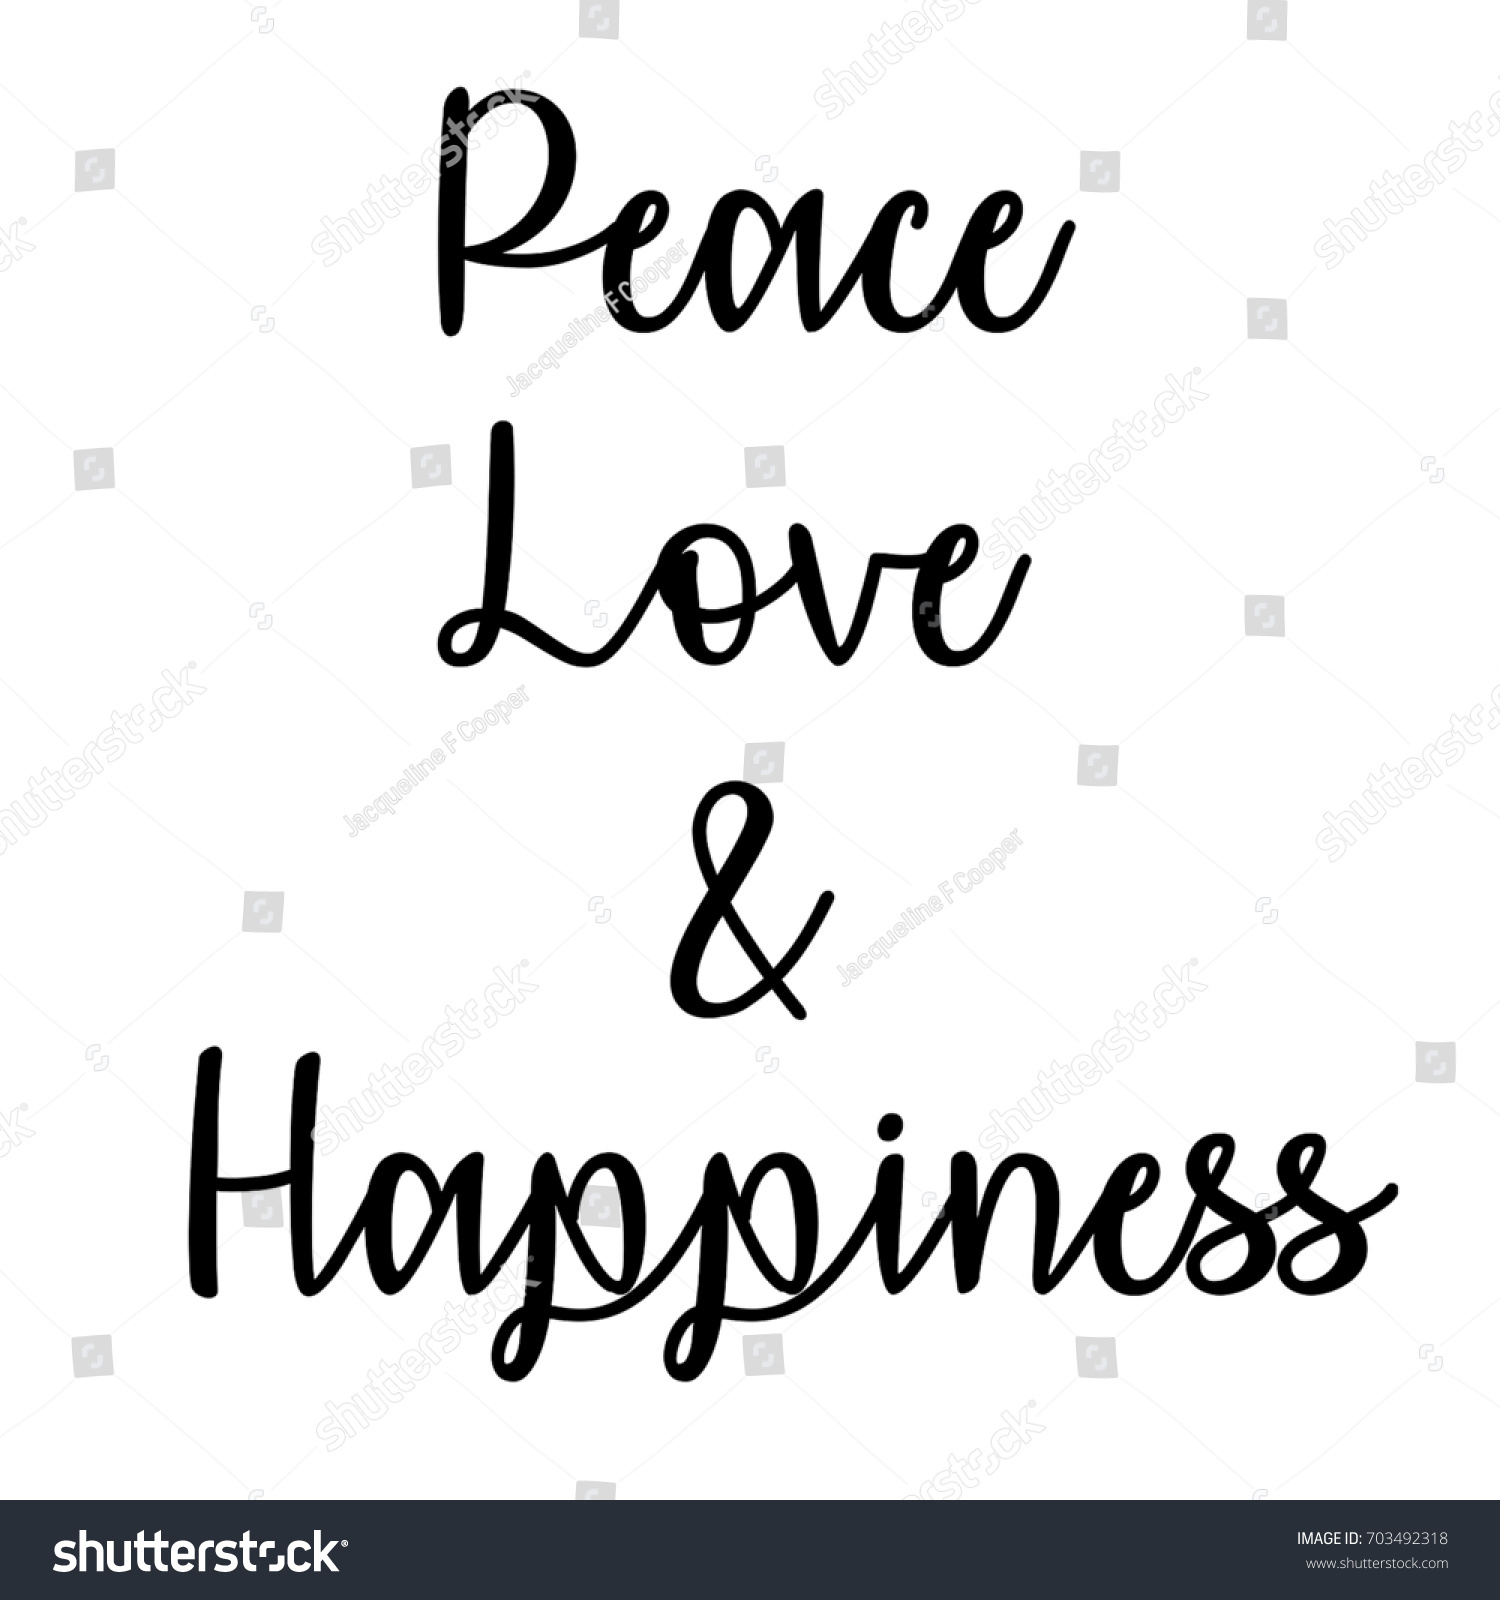 peace love happiness quotes